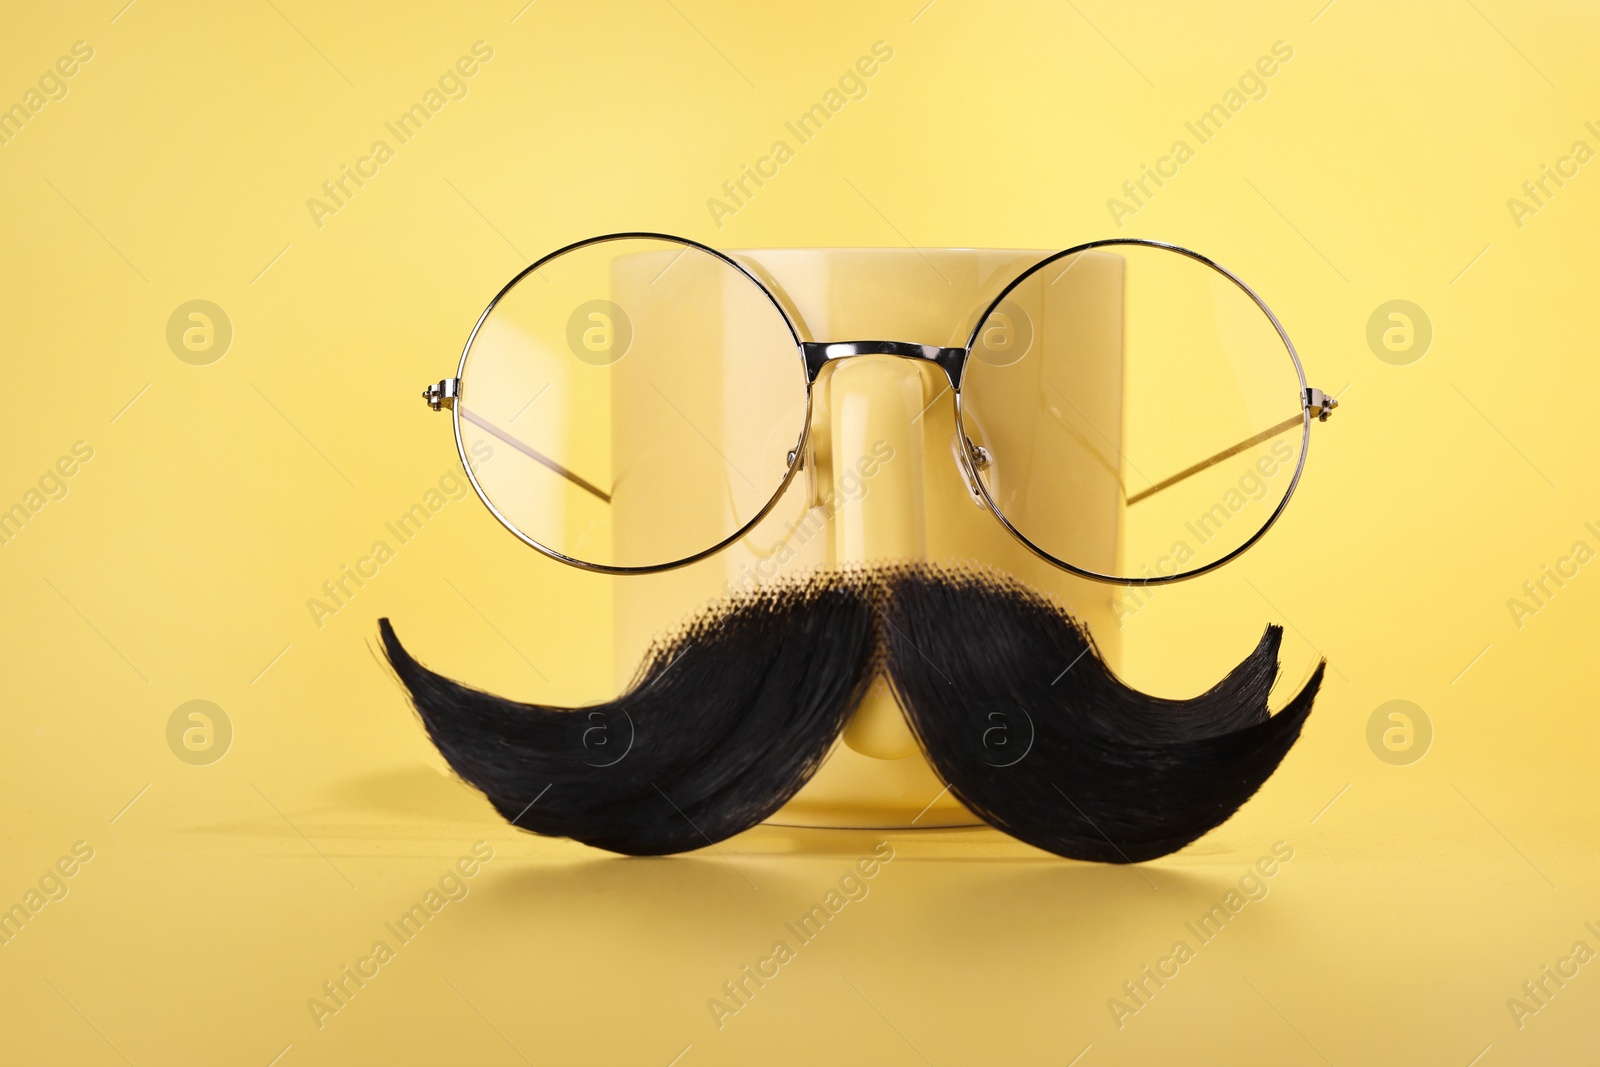 Photo of Man's face made of artificial mustache, glasses and cup on yellow background